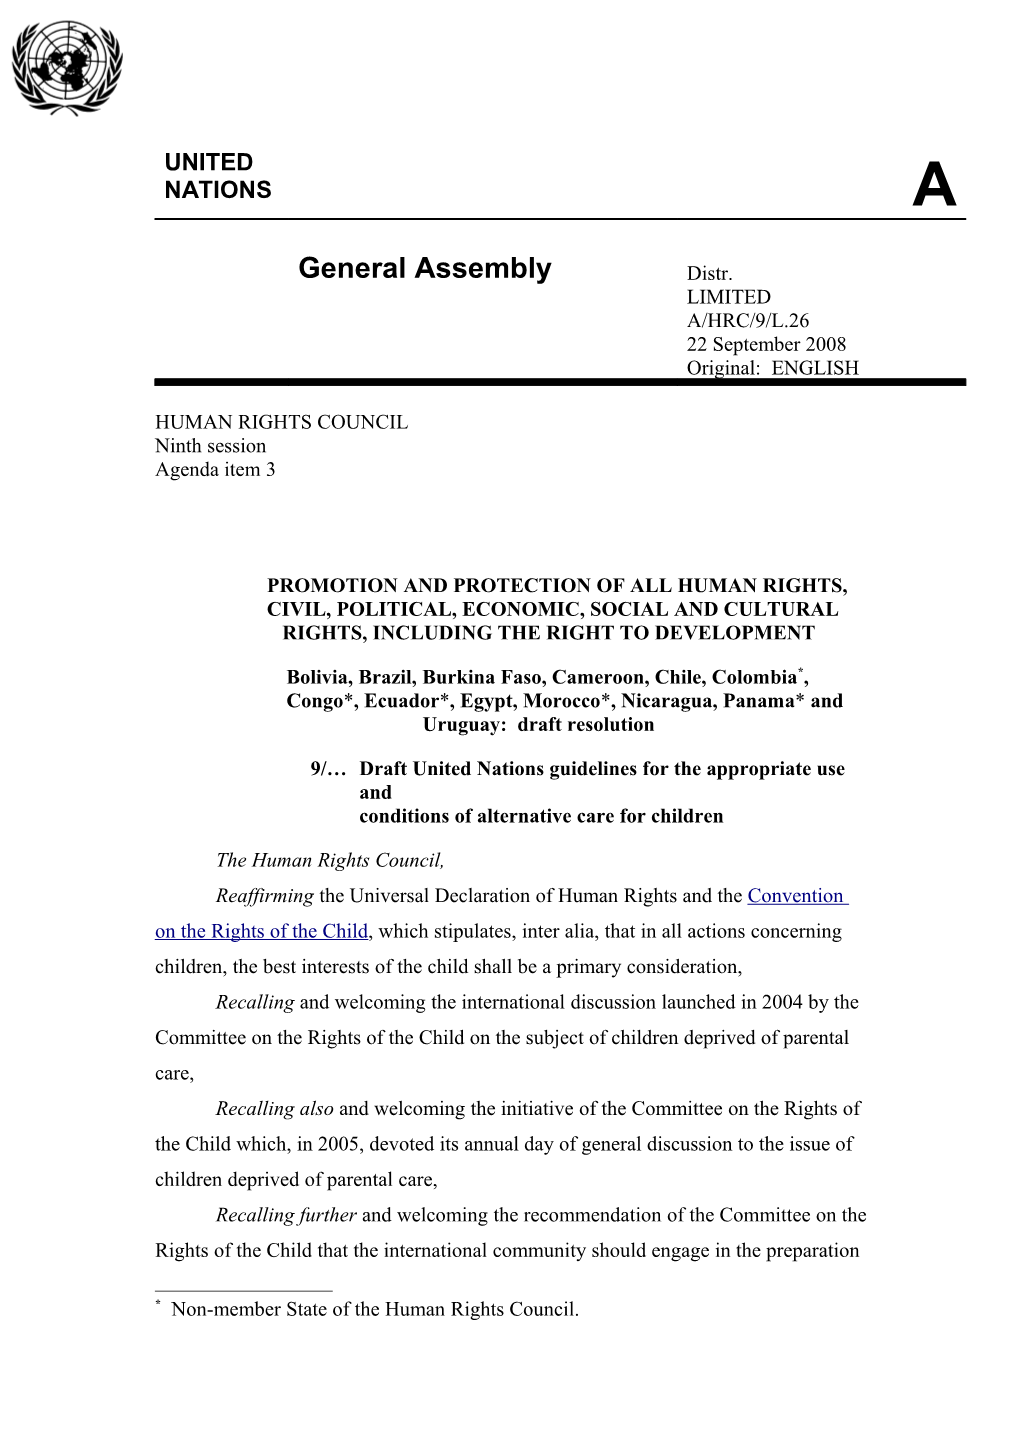 Action on Resolution on UN Guidelines for the Appropriate Use and Conditions of Alternative